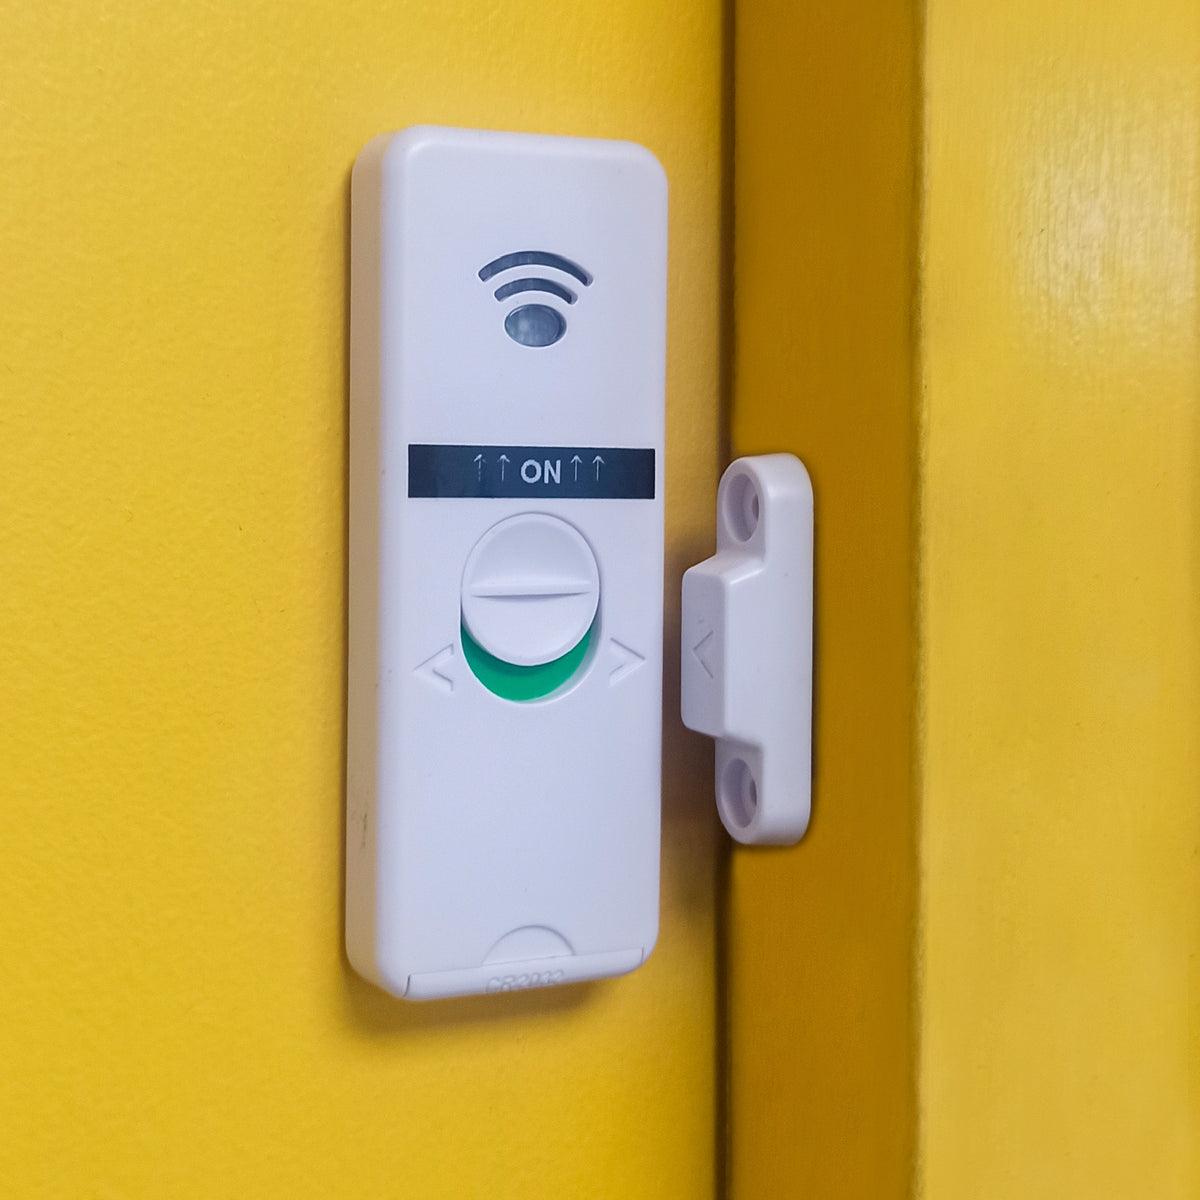 A door sensor attached to a yellow wall